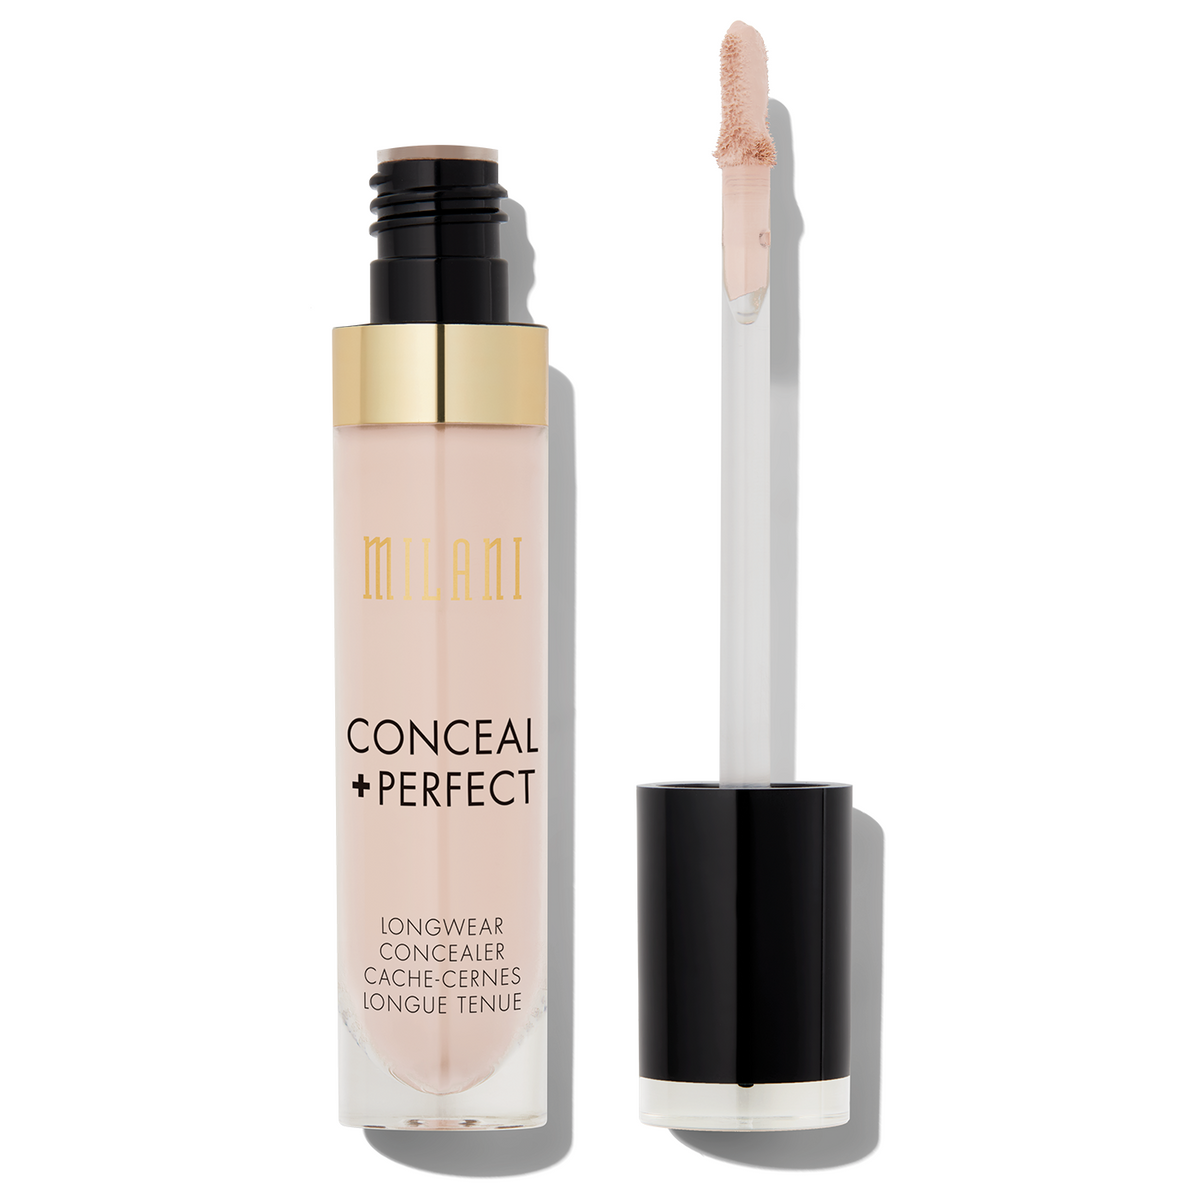 MILANI Conceal + Perfect Long-Wear Concealer - Ivory Rose #105